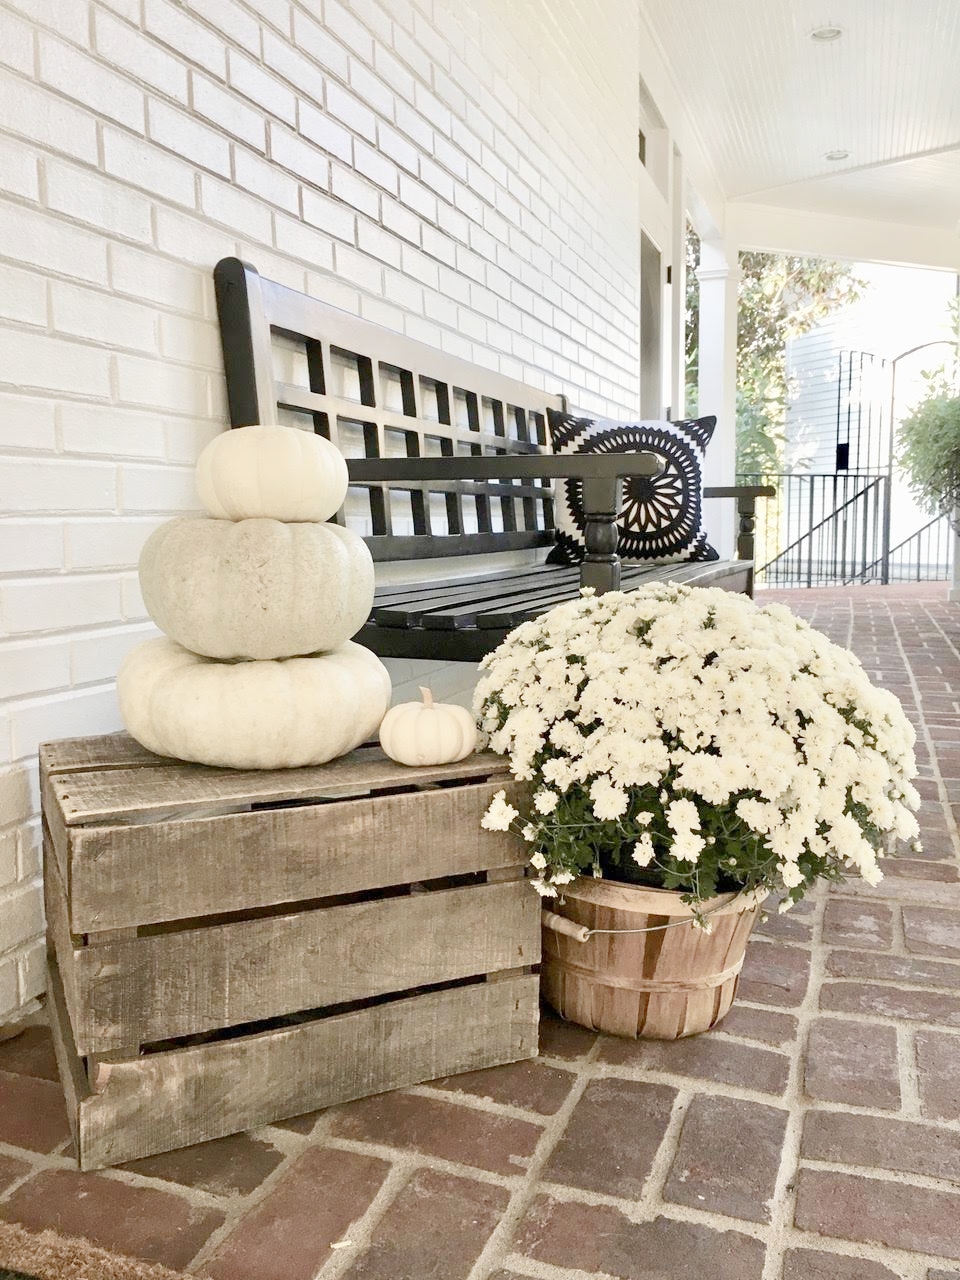  Fall Porch Decorations on Breezeway White pumpkin stack on wooden crates 